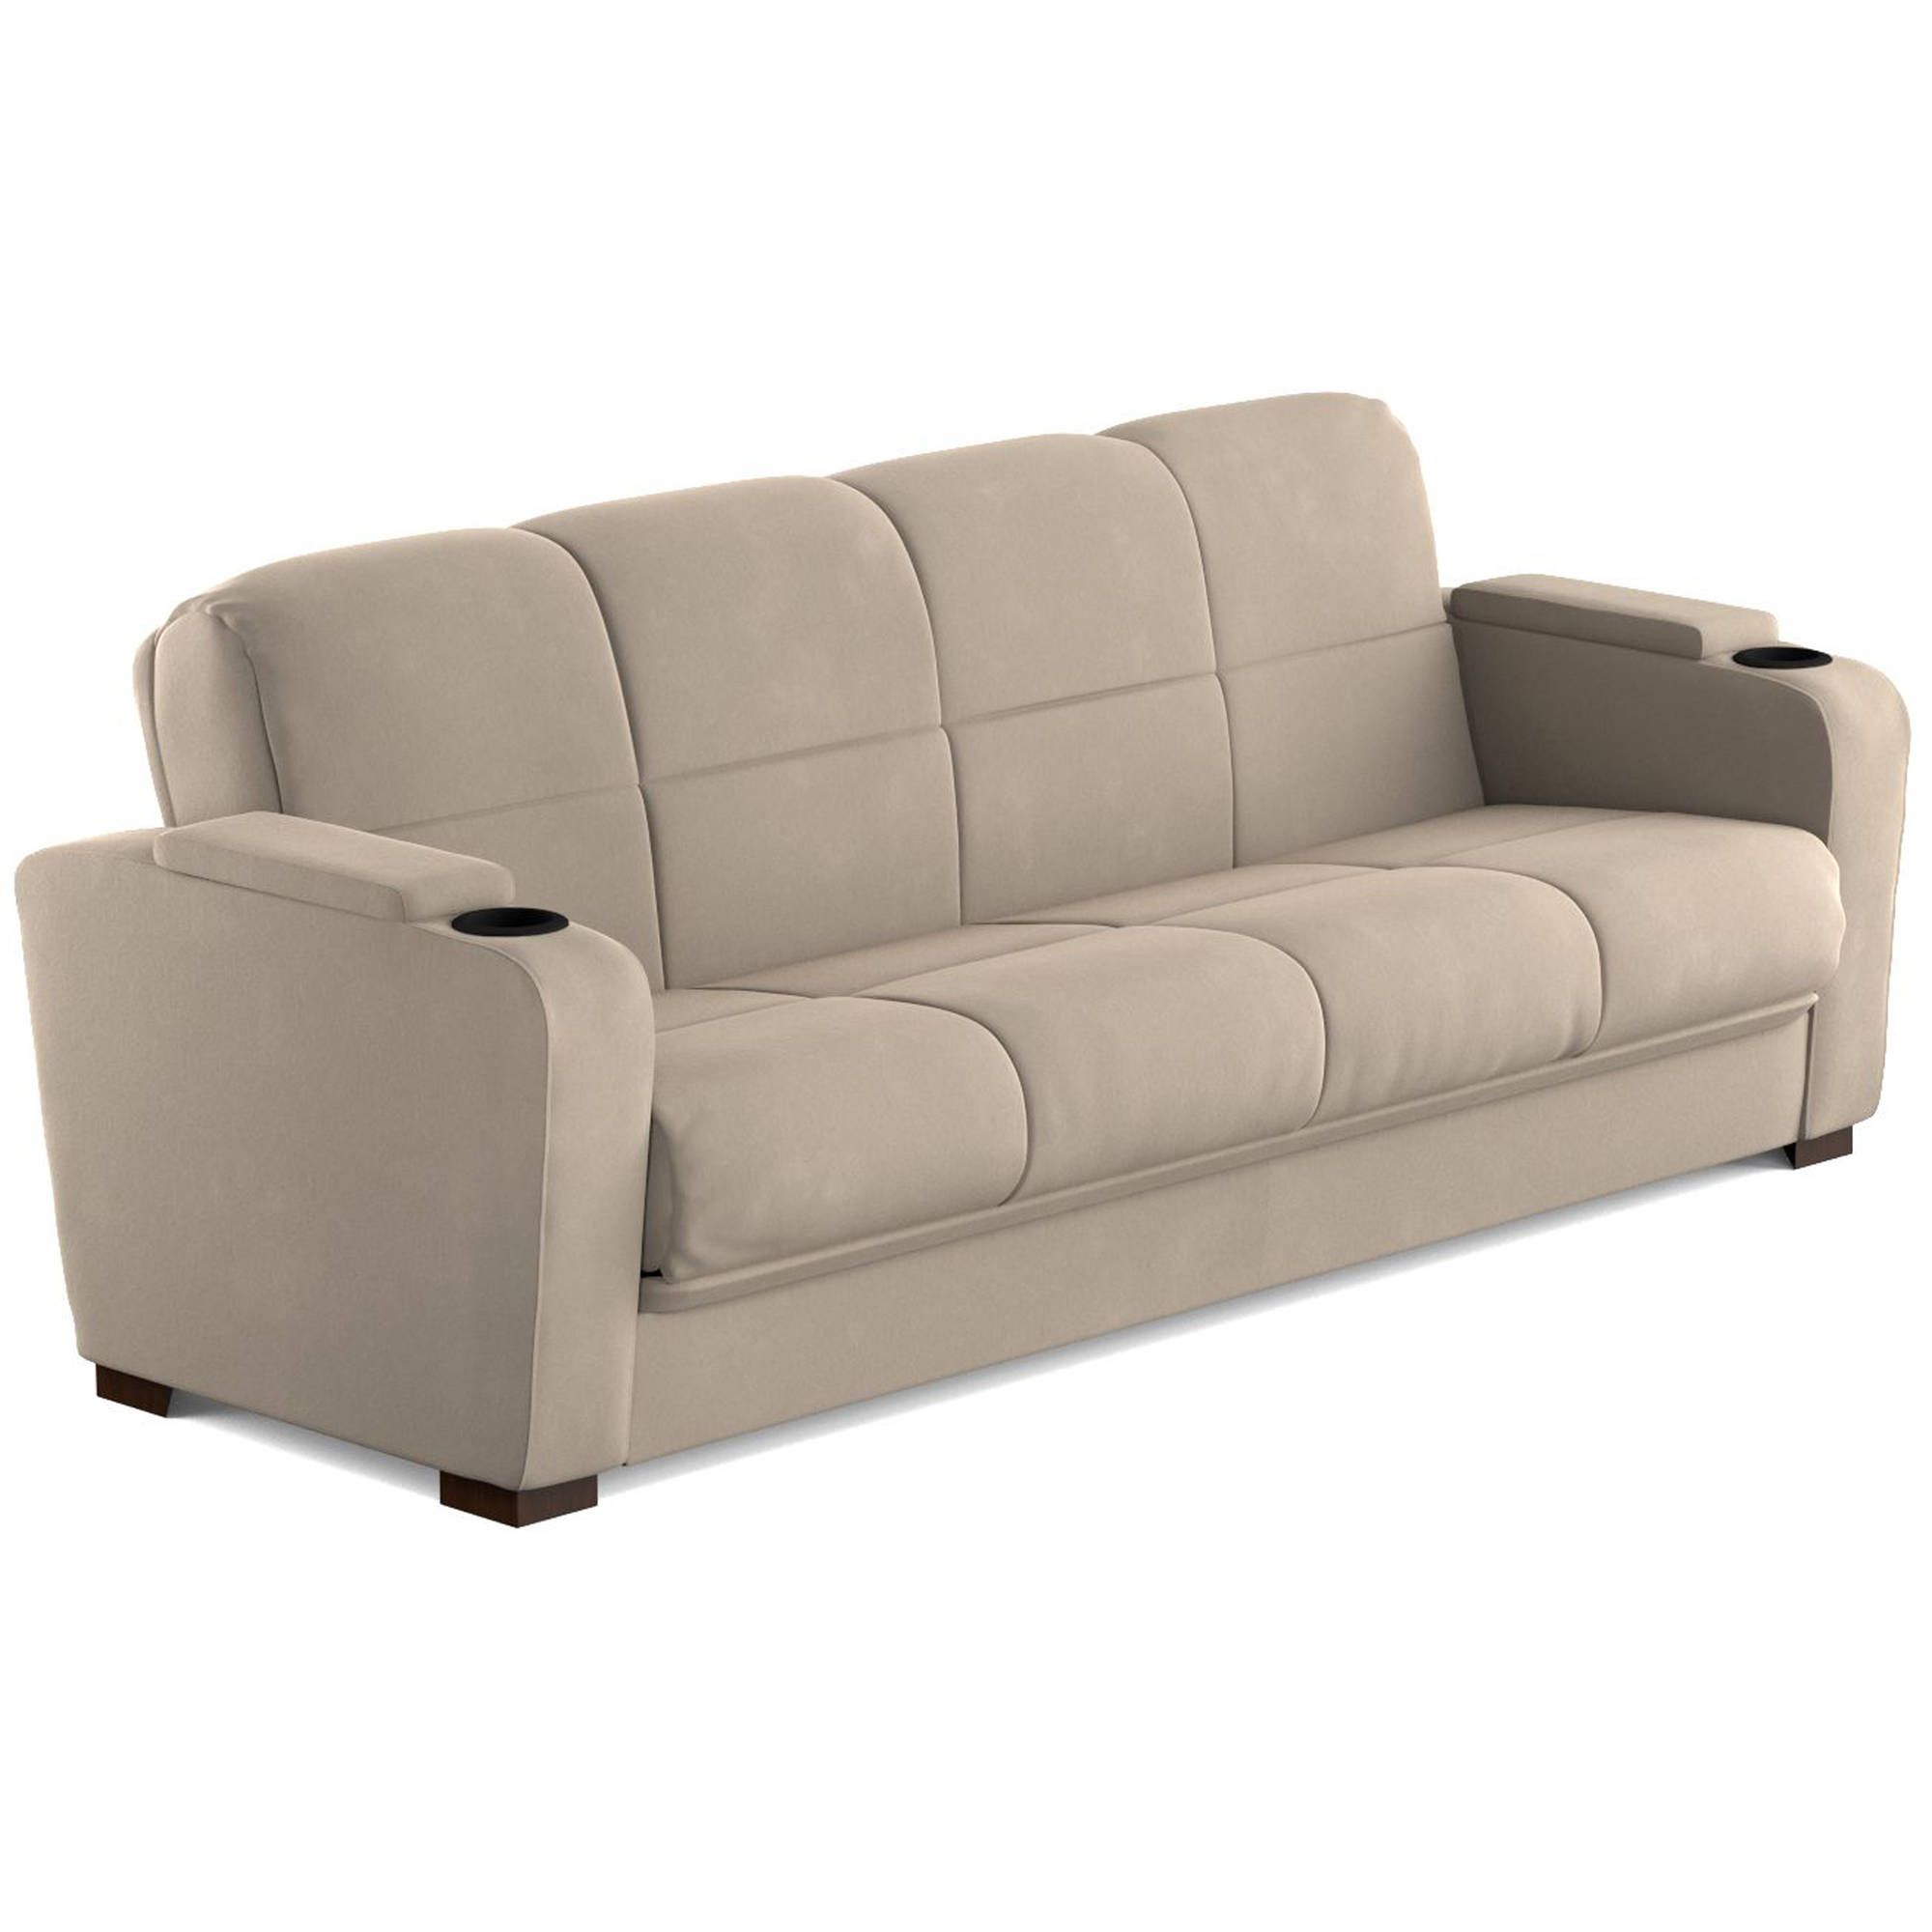 Mainstays Tyler Futon With Storage Sofa Sleeper Bed Within Celine Sectional Futon Sofas With Storage Reclining Couch (View 5 of 15)